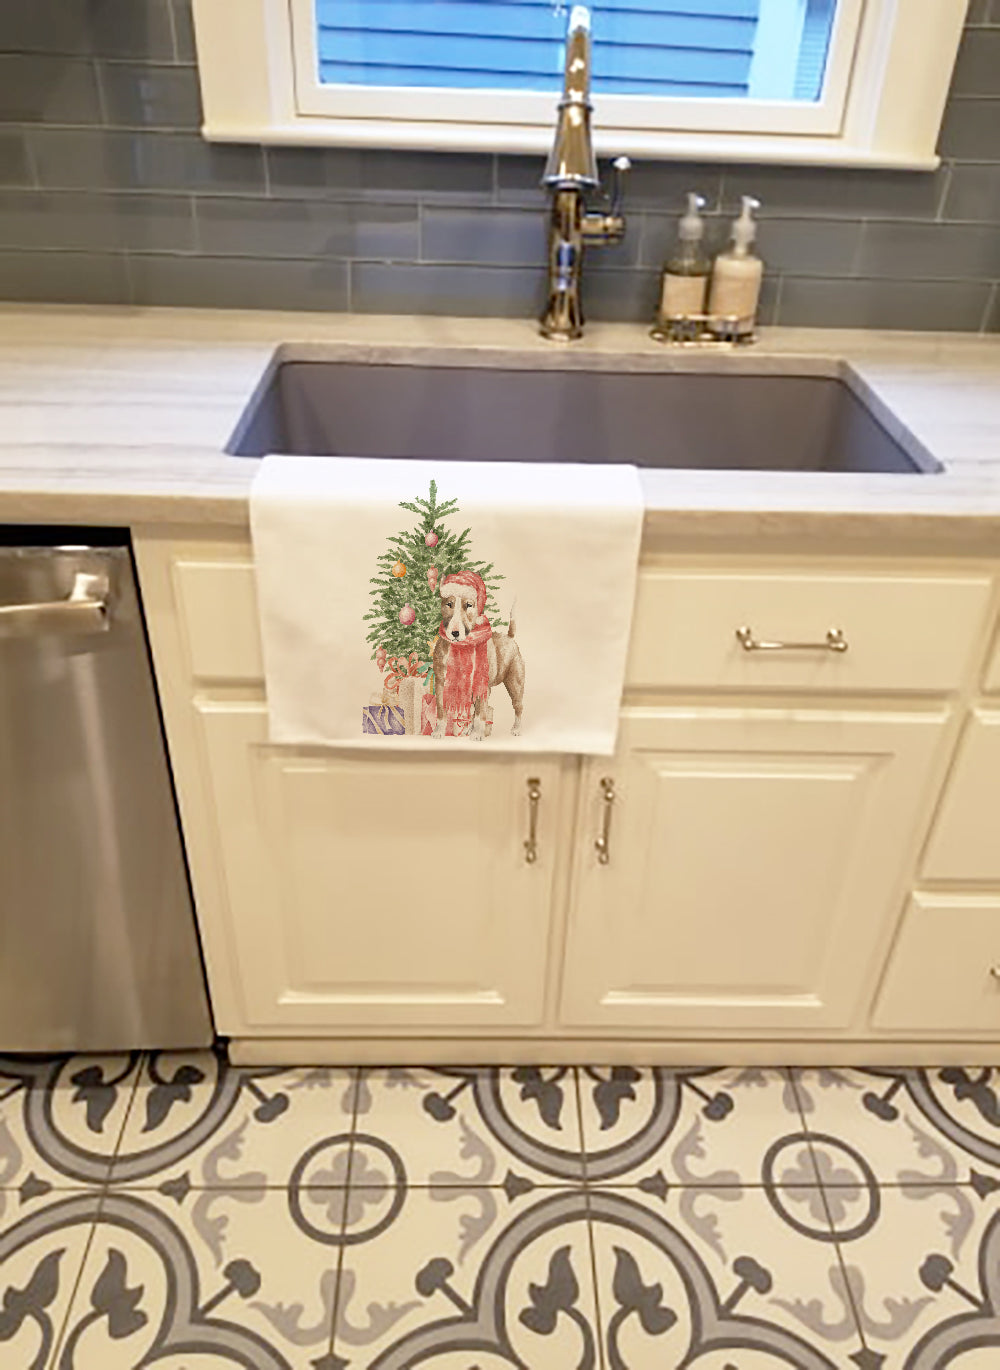 Buy this Bull Terrier Red Christmas Presents and Tree White Kitchen Towel Set of 2